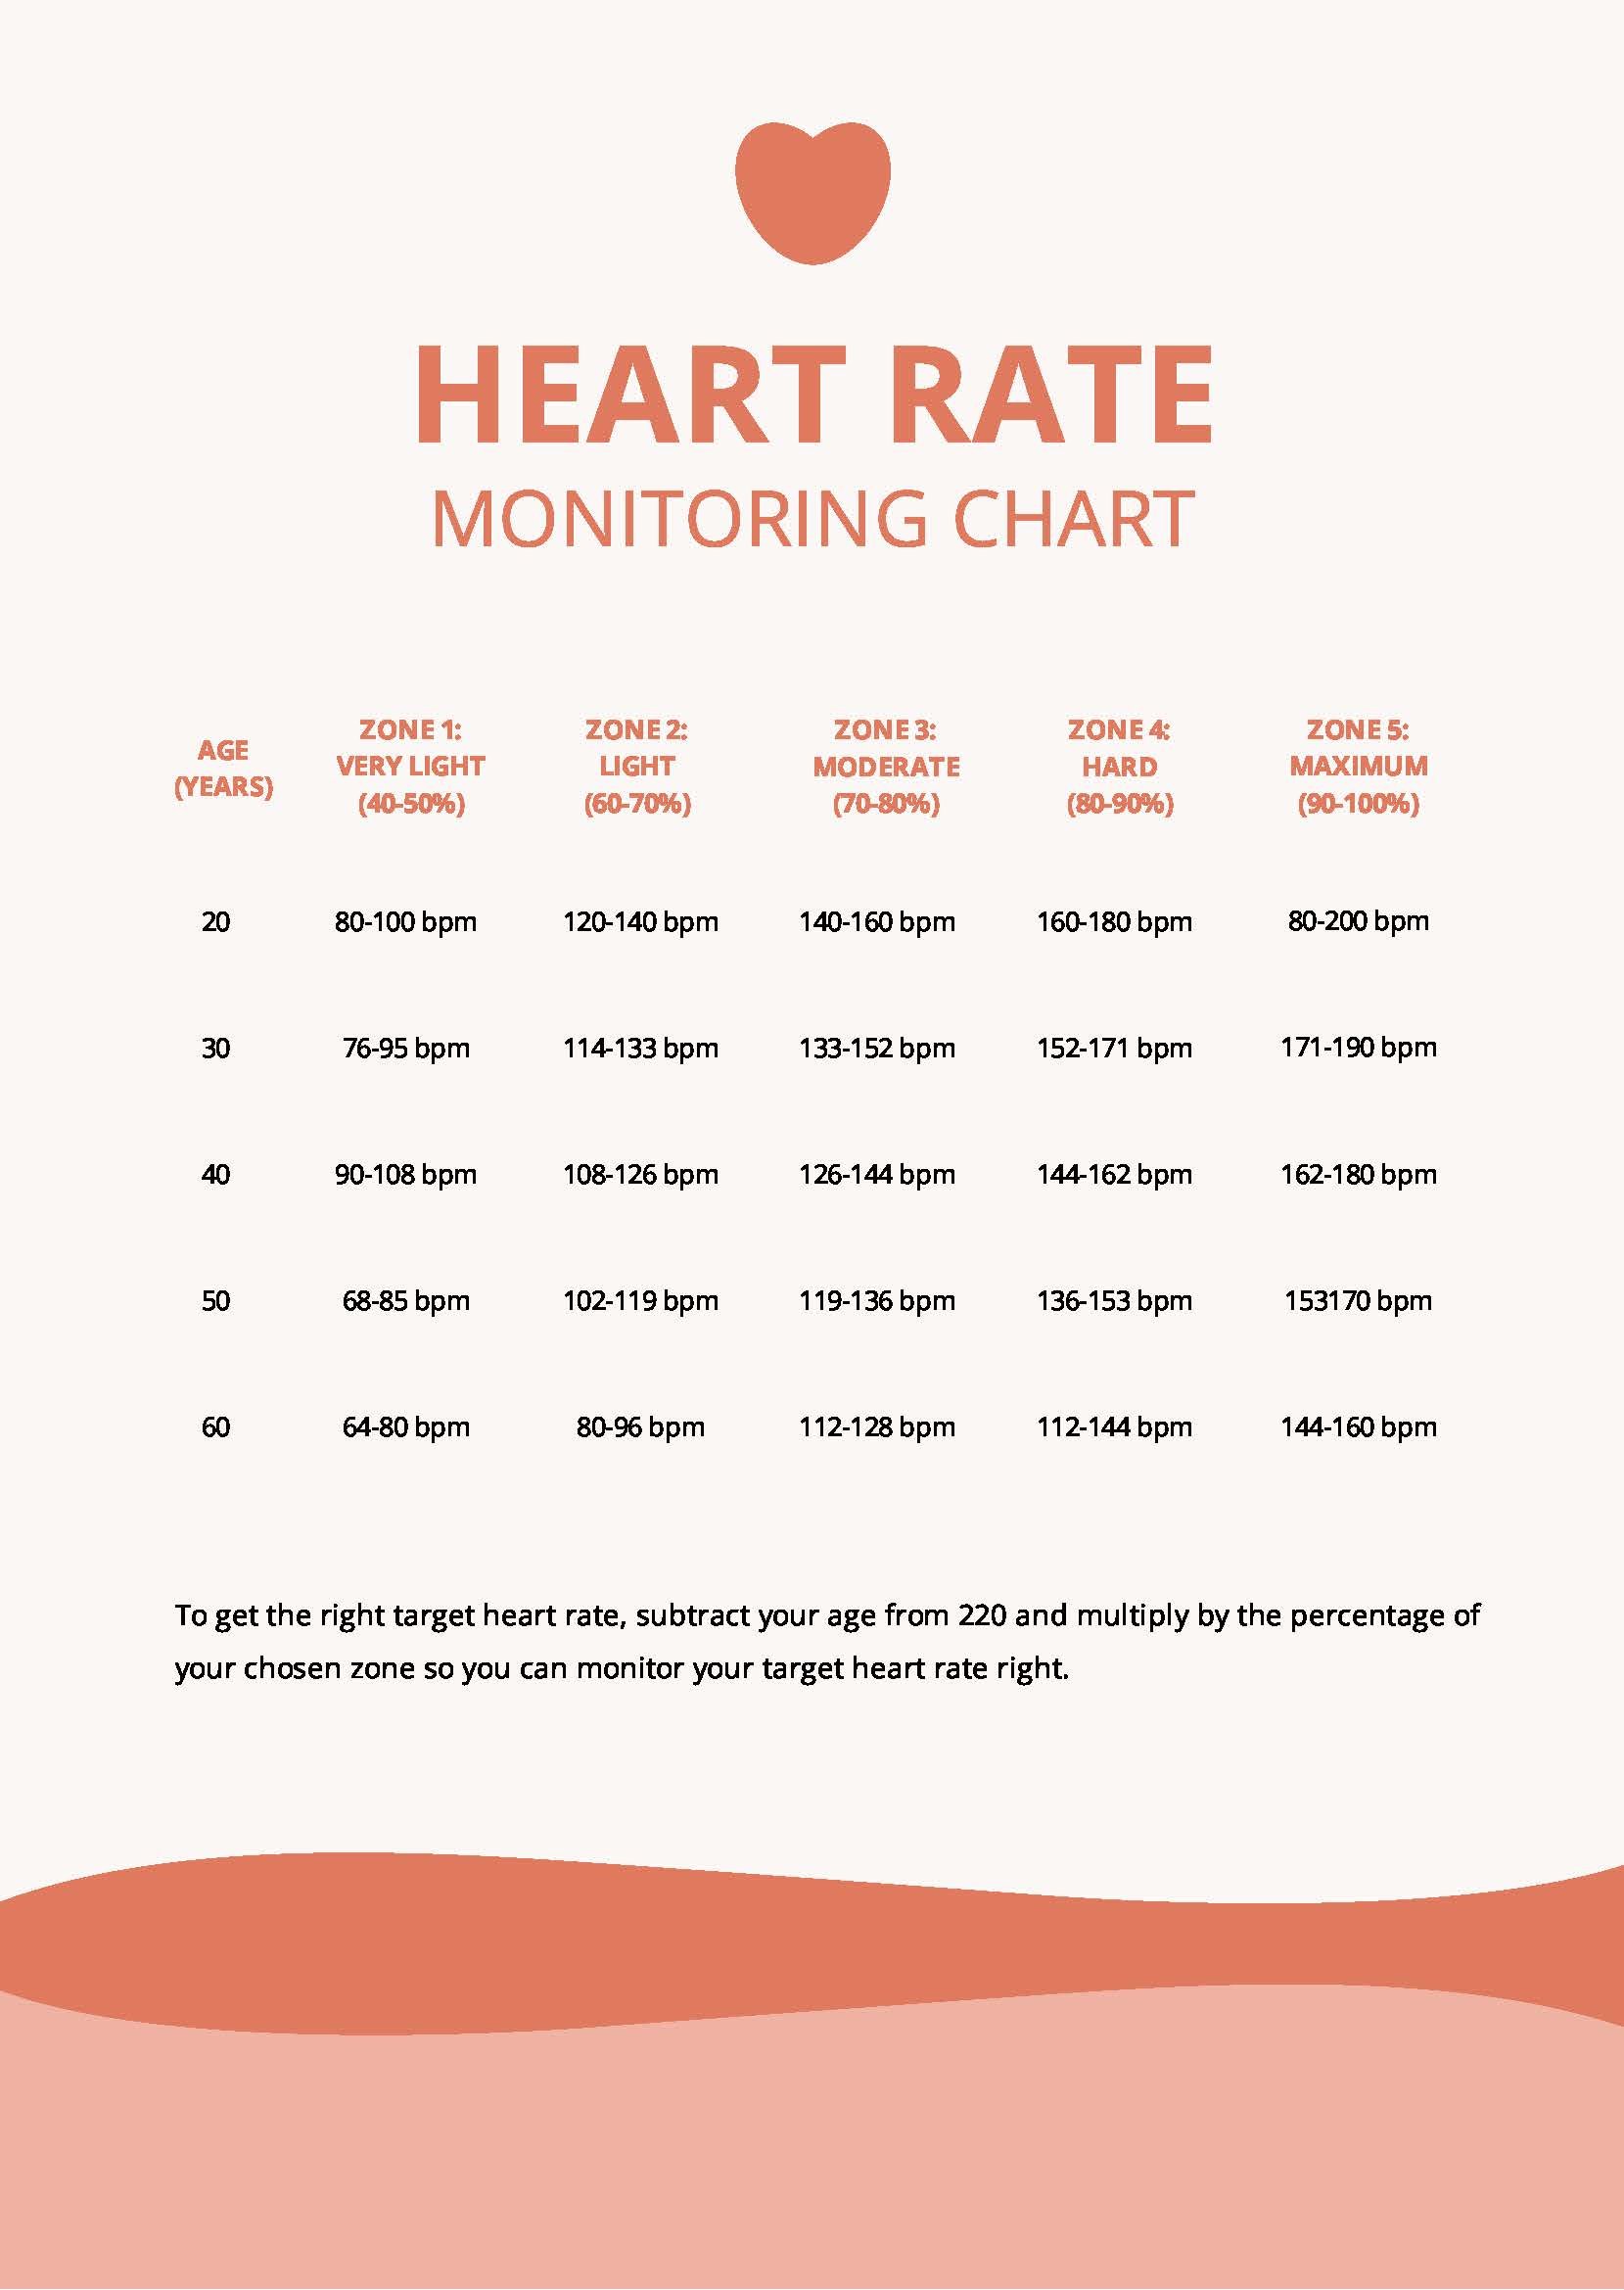 Heart Rate Monitoring Chart in PDF